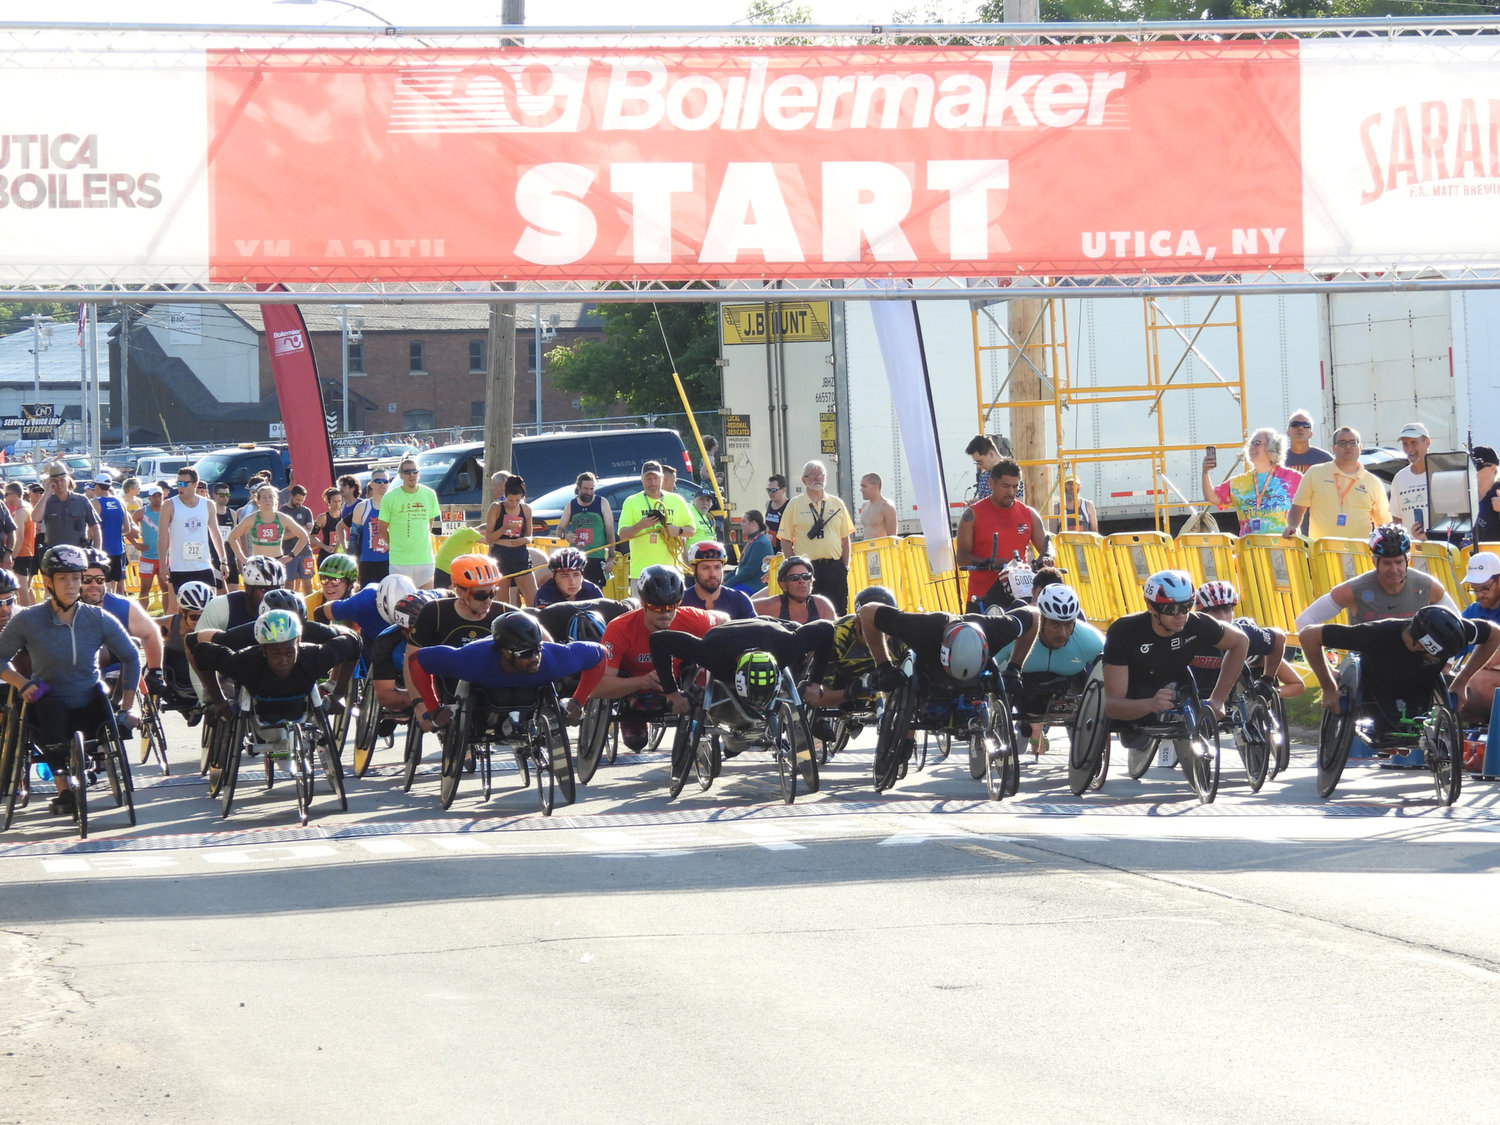 Wheelchair racers take their place for the 45th Boilermaker Road Race on Sunday, July 10 in Utica.